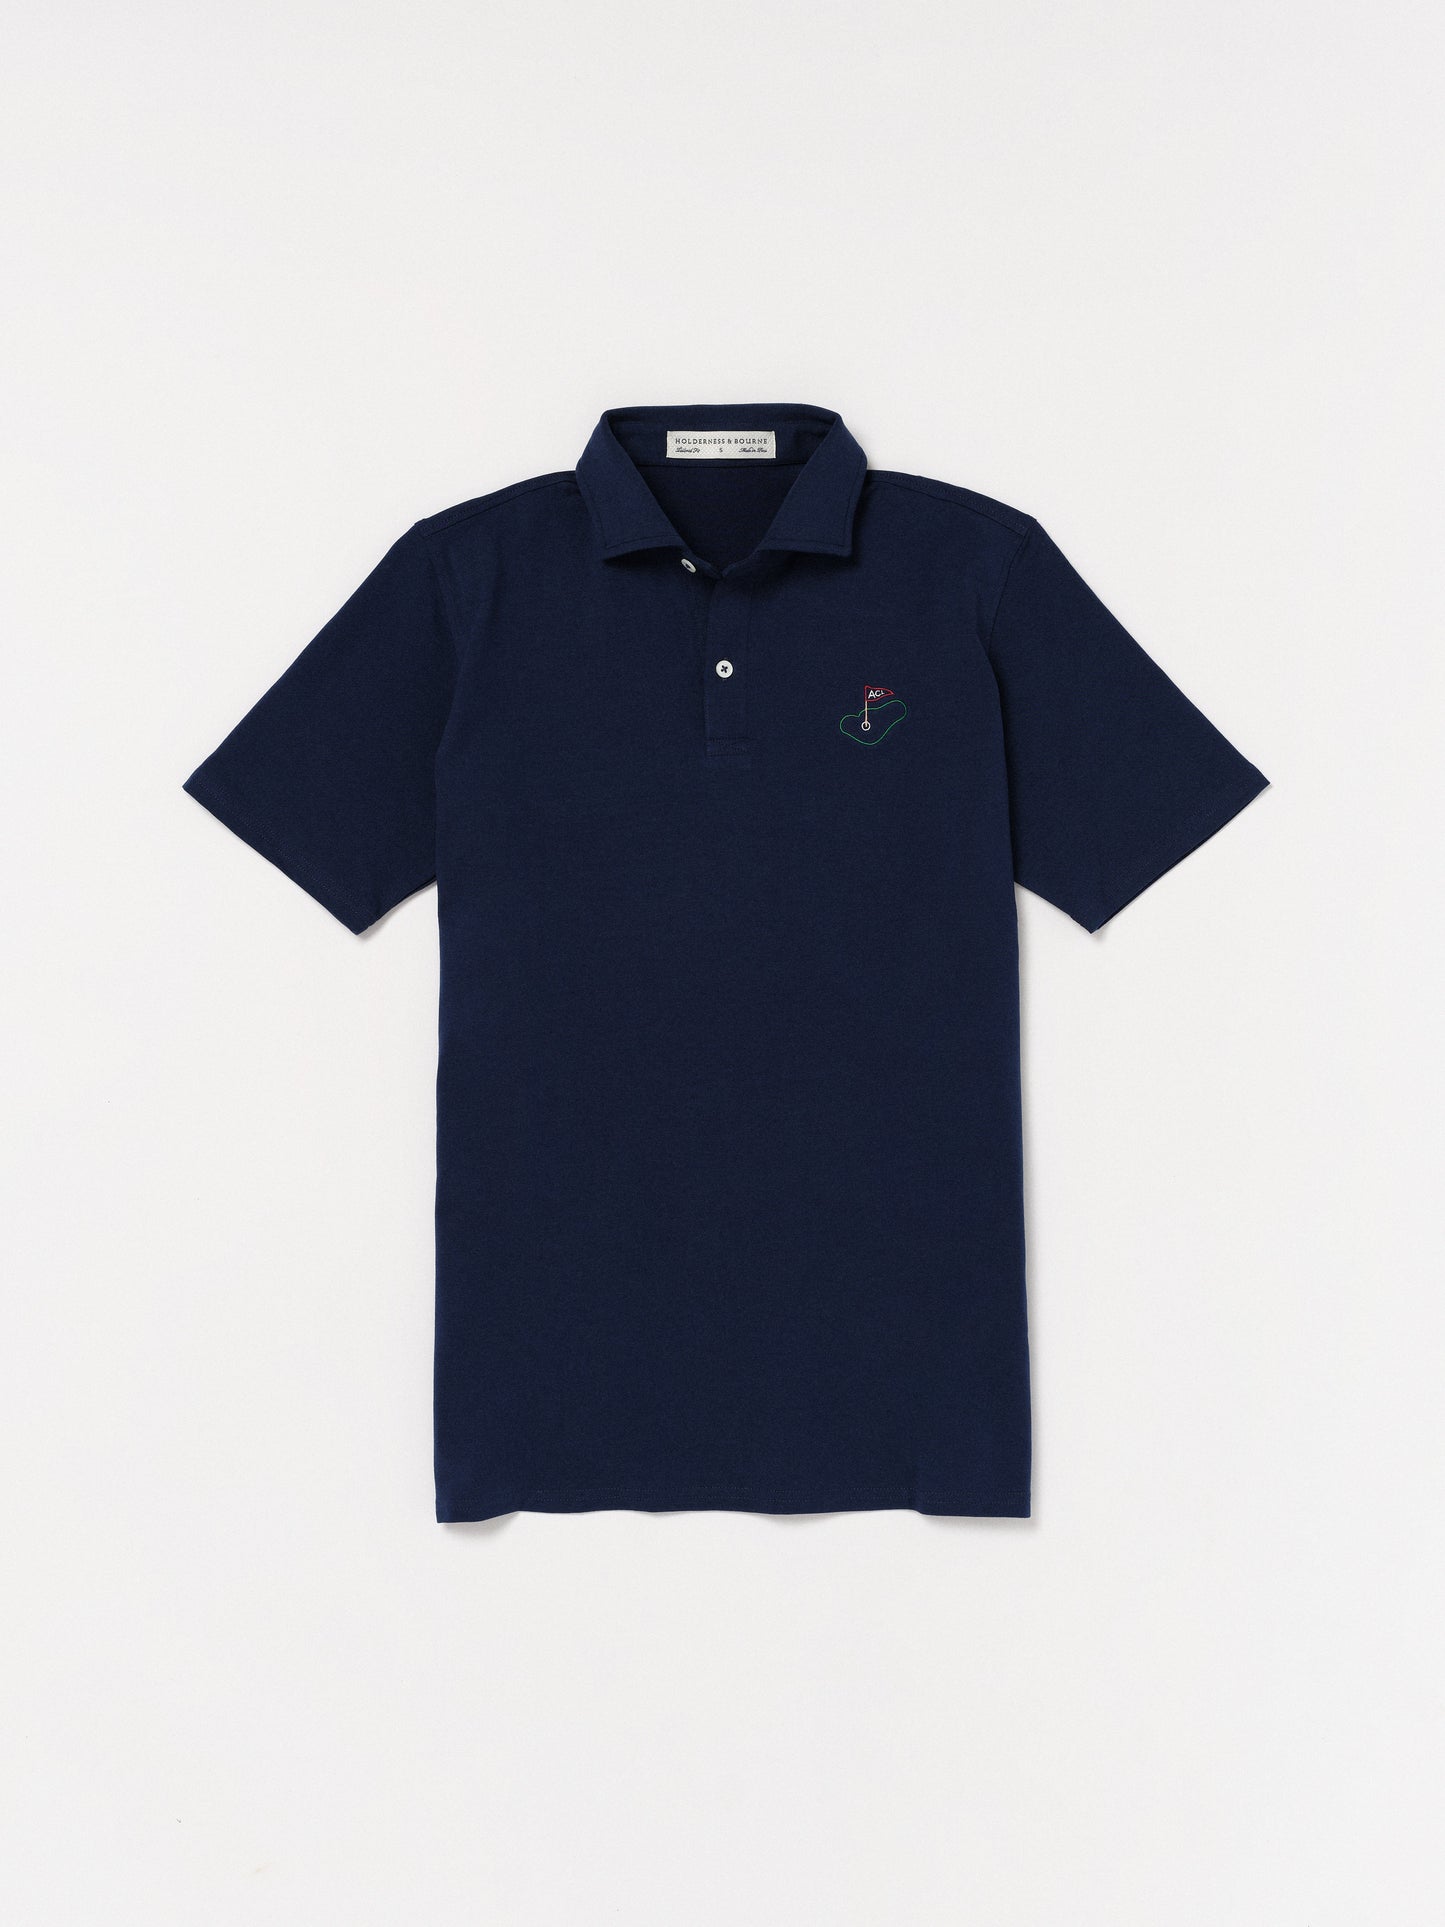 Holderness & Bourne Cotton Polo Shirt in Navy